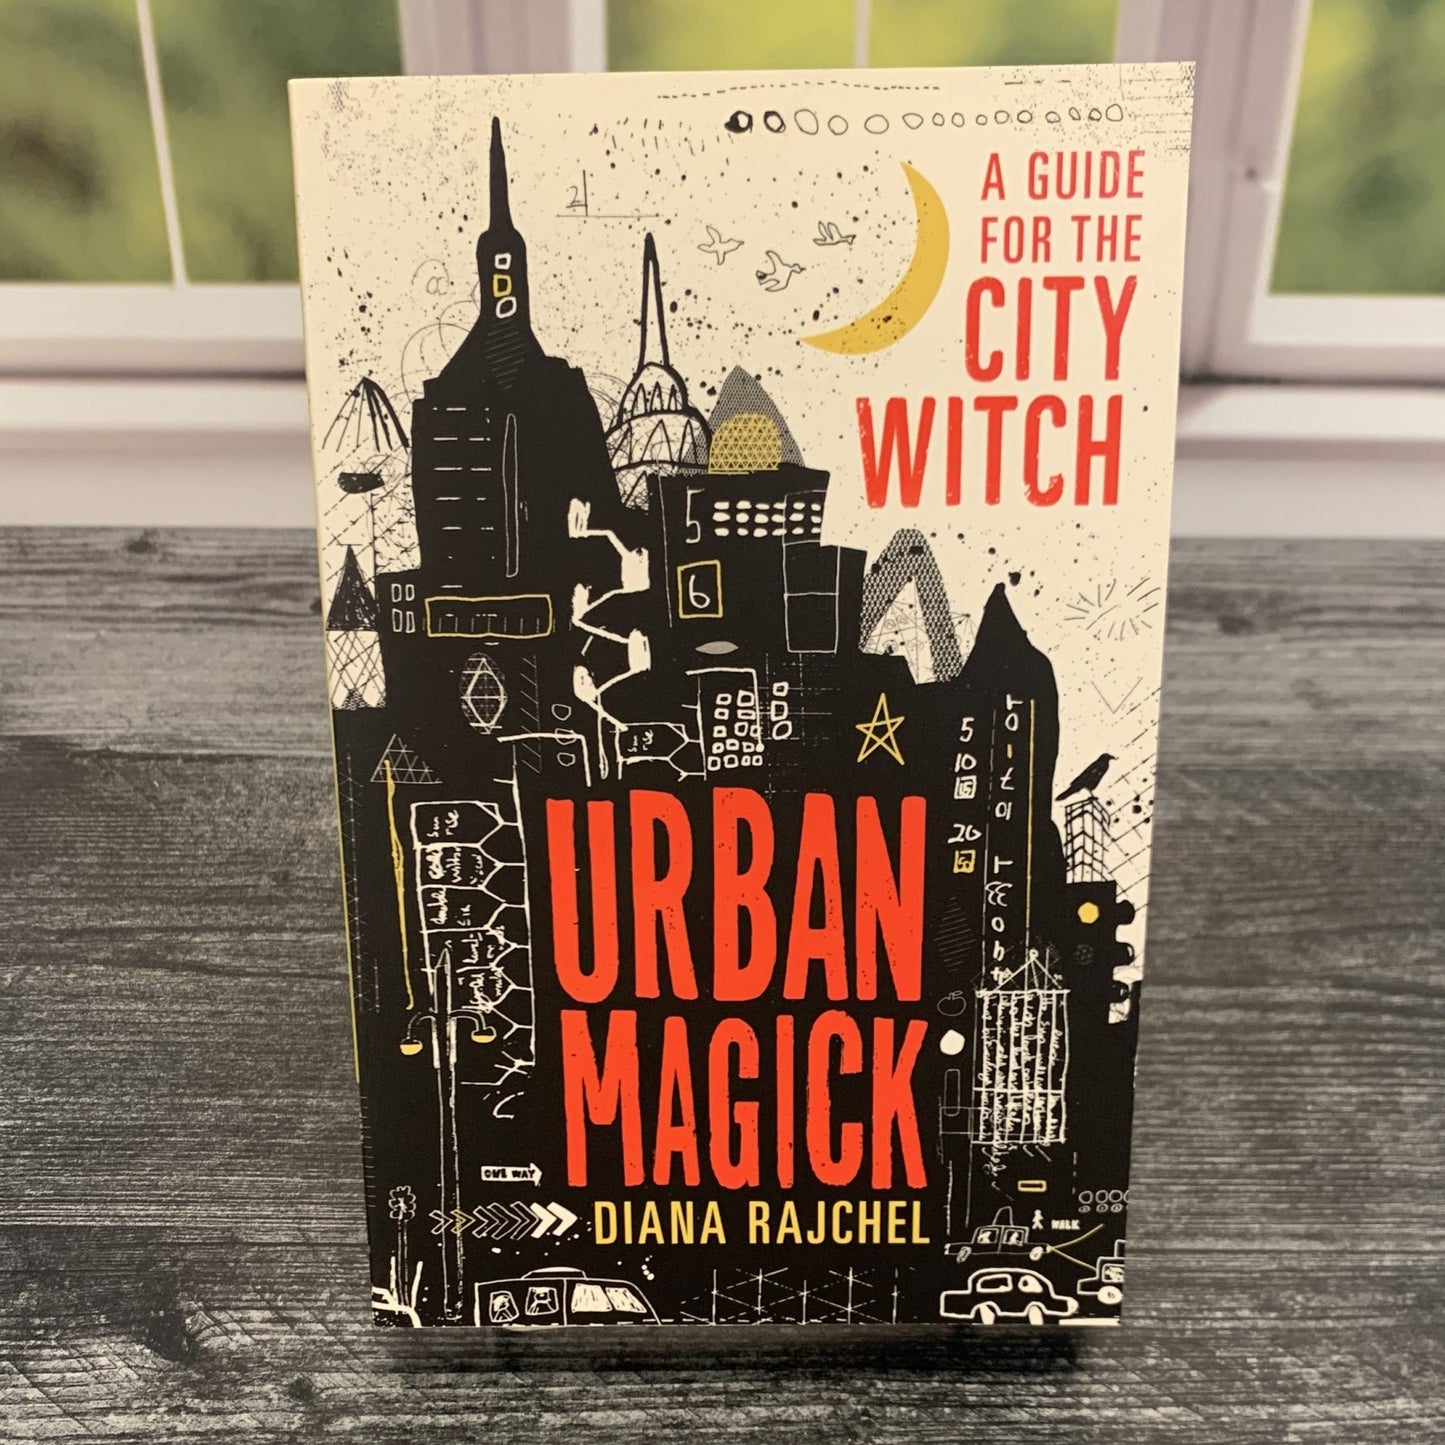 Urban Magick: A Guide for the City Witch by Diana Rajchel